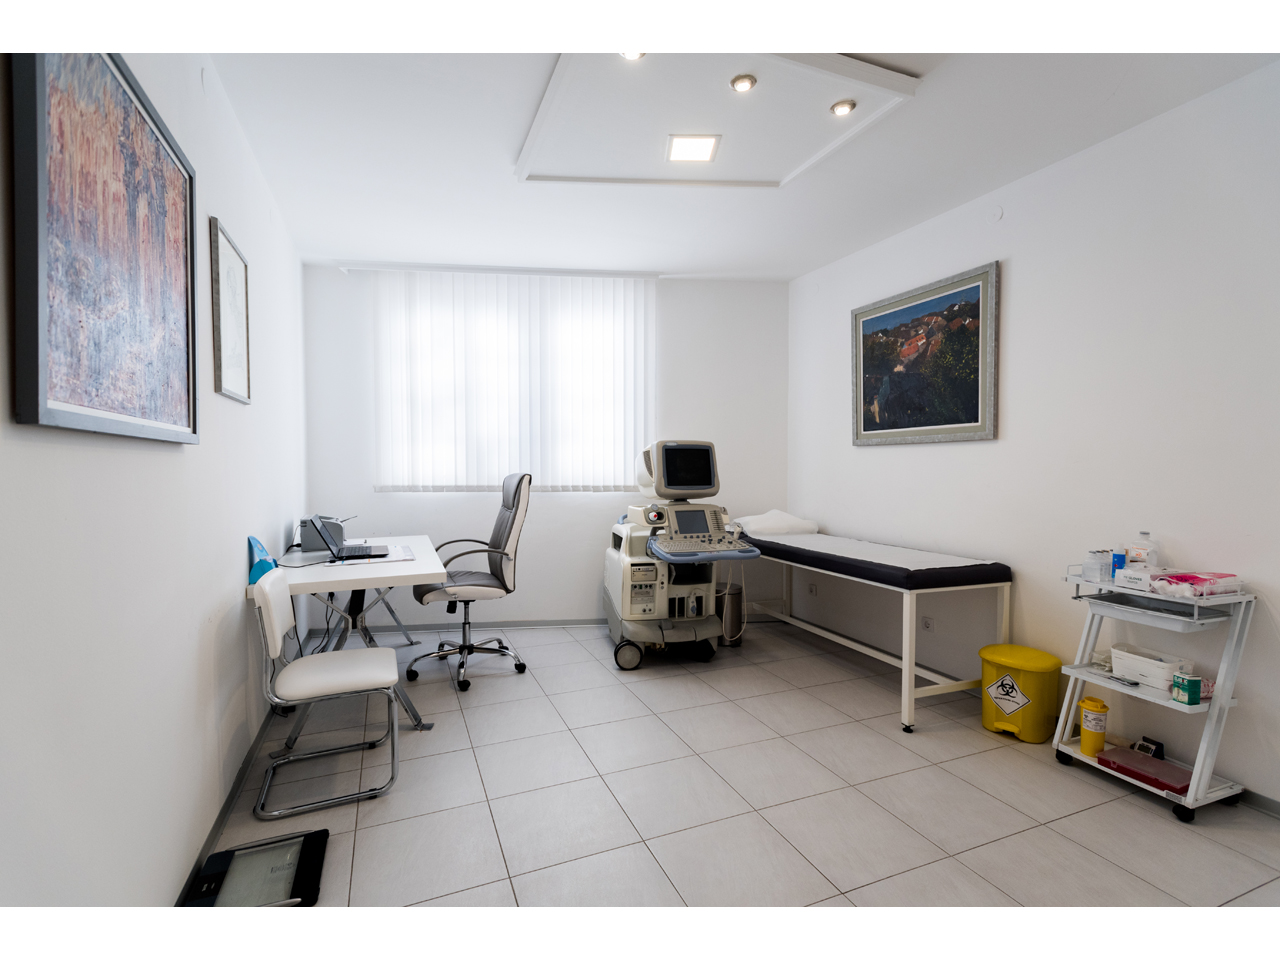 PAIN AND PHYSICAL THERAPY CENTER ANALGESIS Acupuncture Belgrade - Photo 5